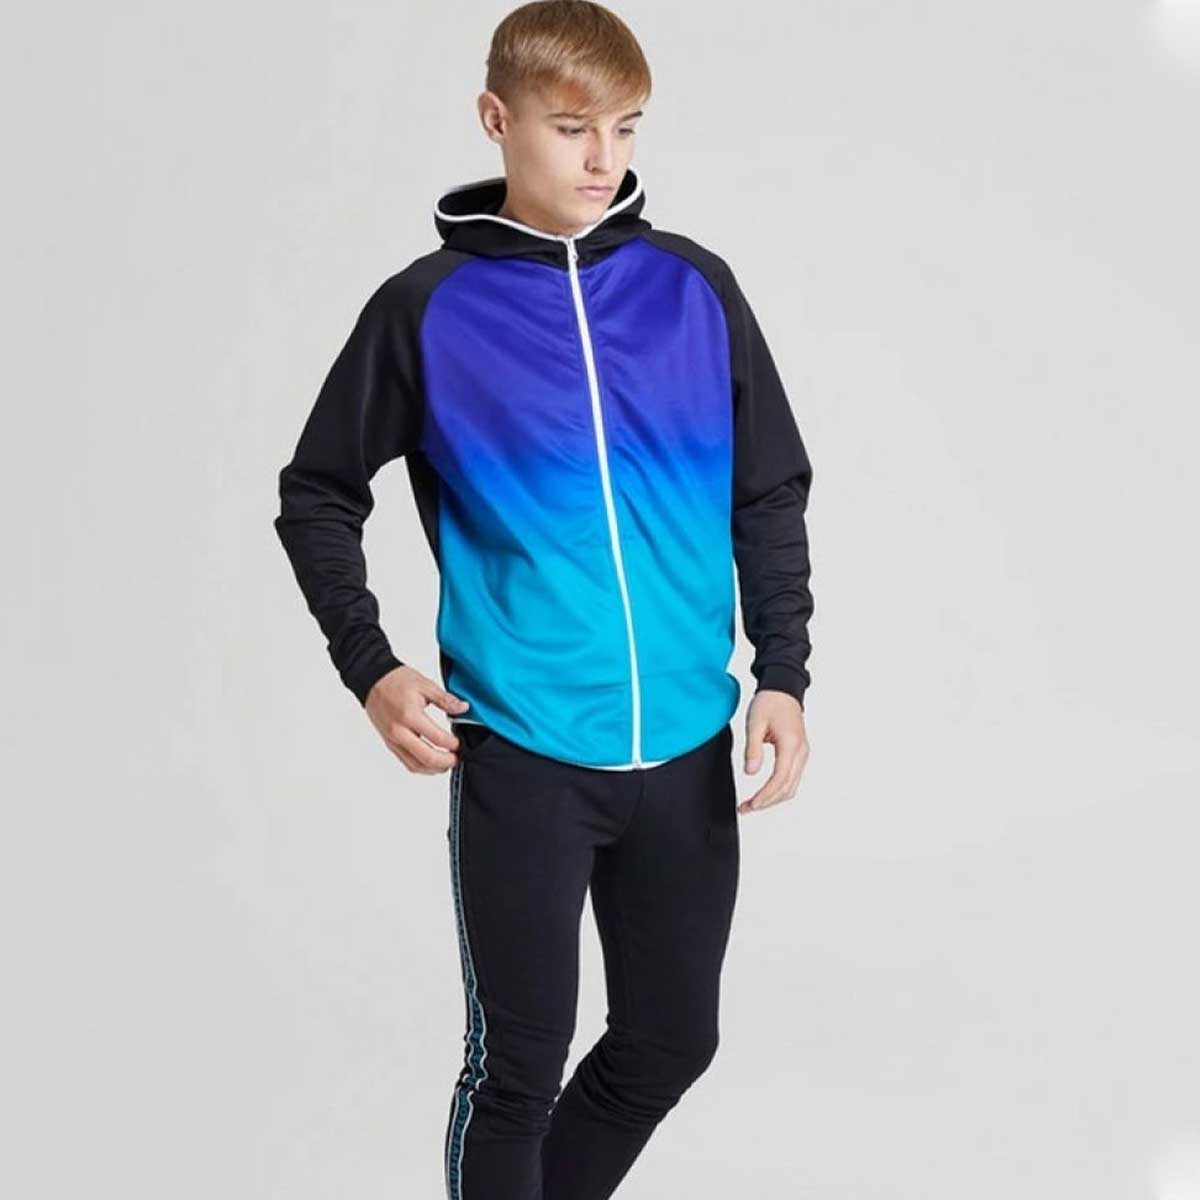 Sublimation Fleece Hoodies Manufacturers in Tula